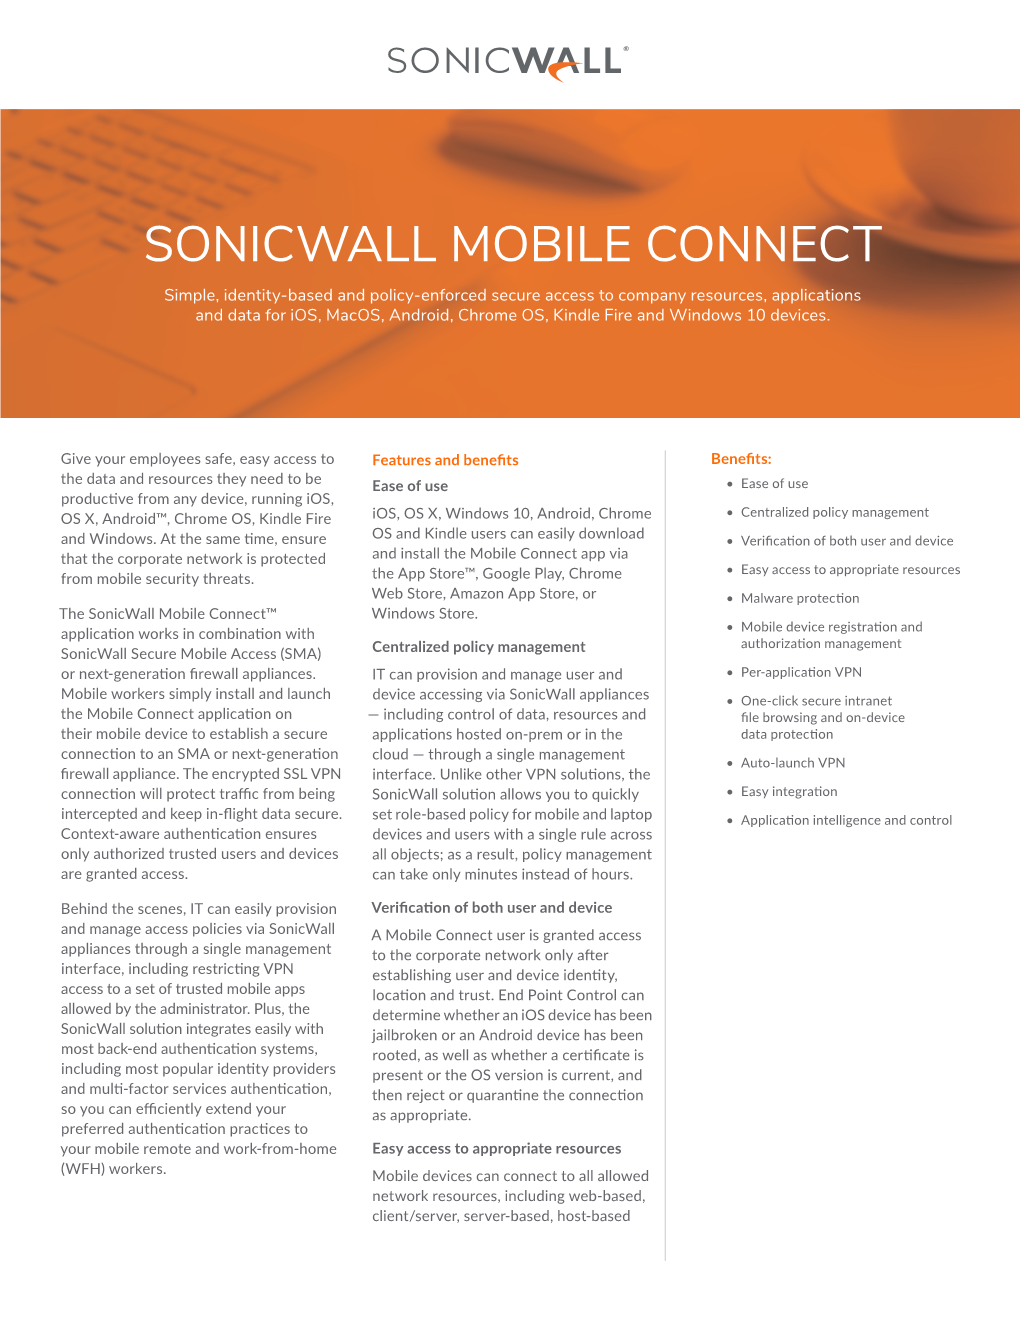 Sonicwall Mobile Connect